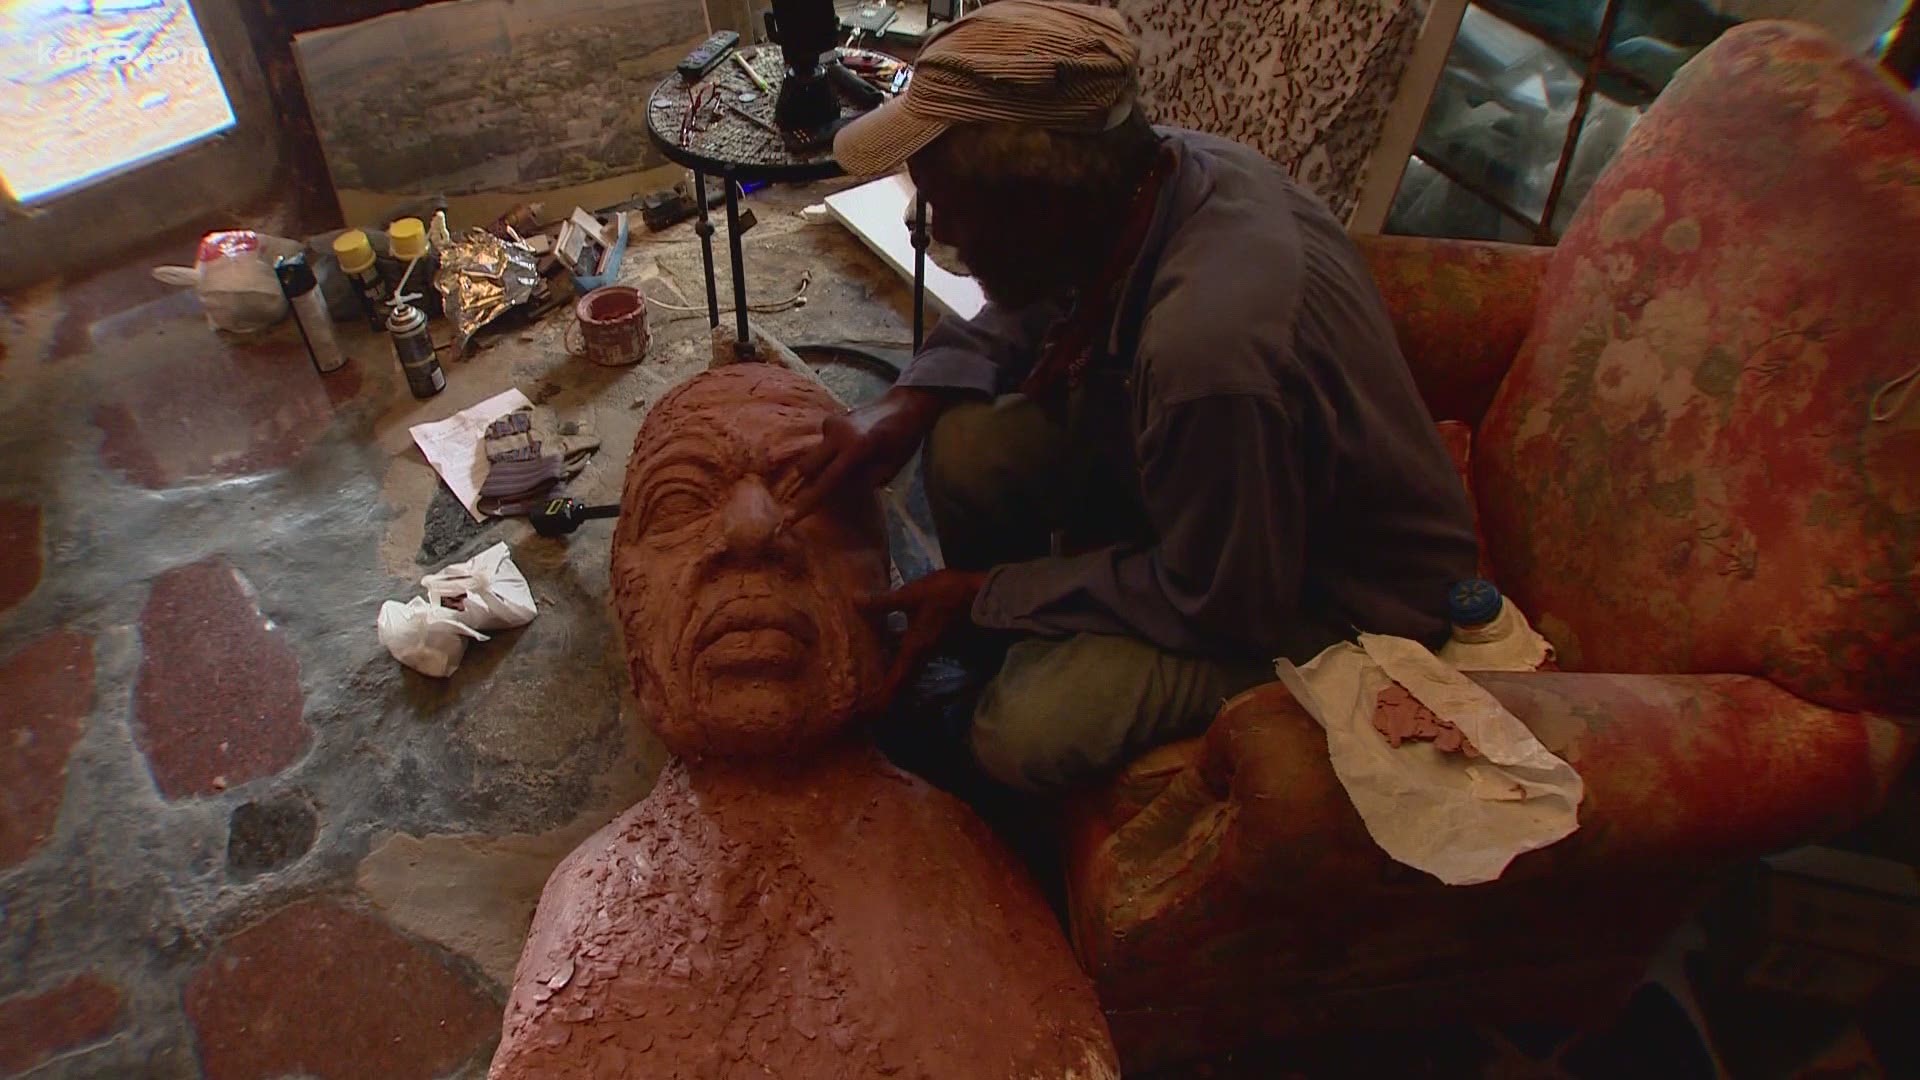 The Fredericksburg artist, Jonas Perkins, is known for his public sculptures. Now he's working on a collection of pieces to keep Lewis' memory alive.